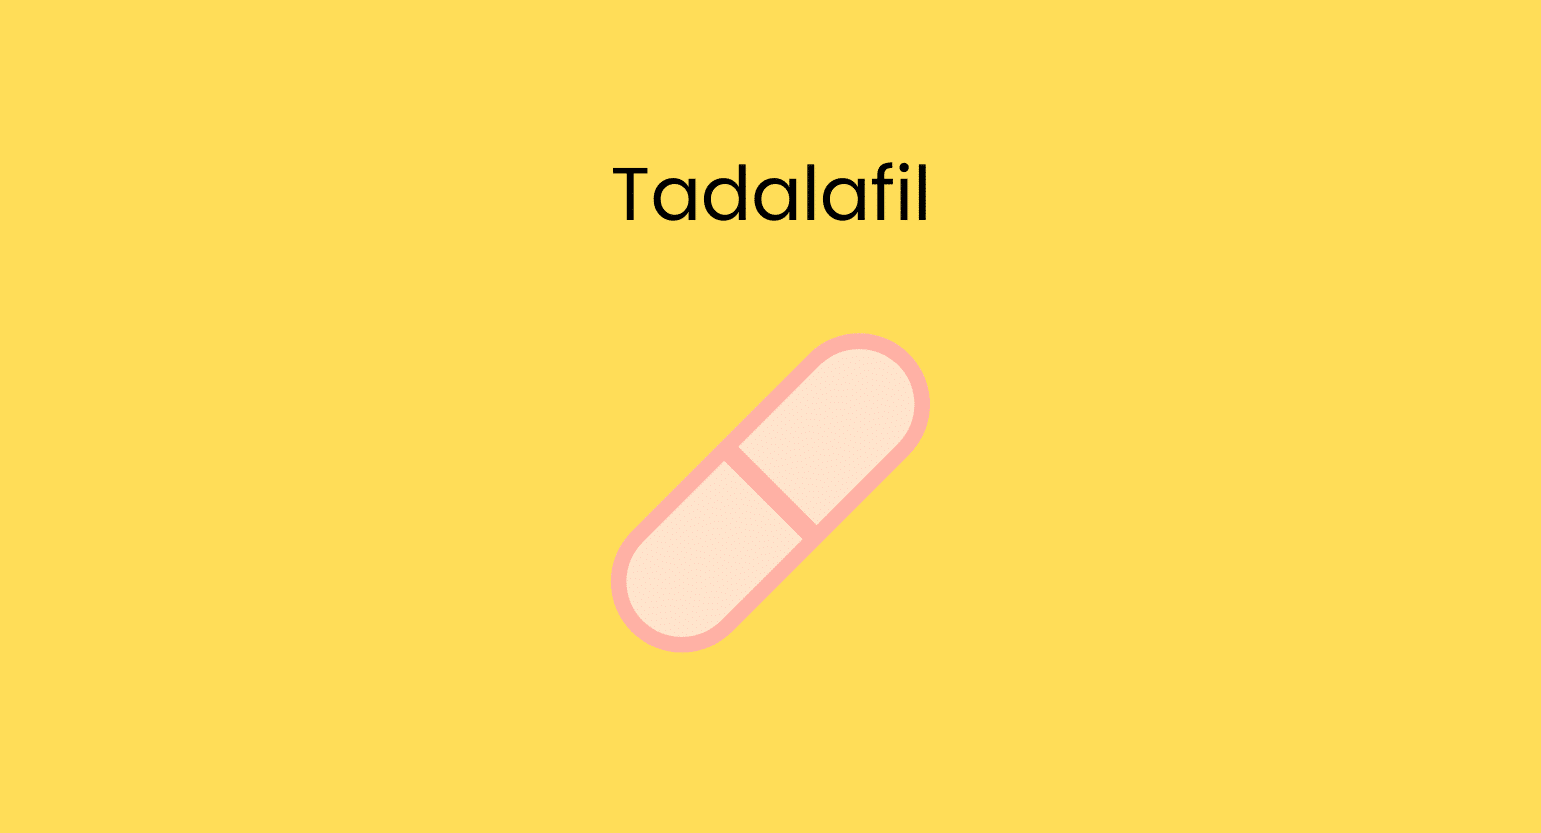 Mixing Tadalafil (Cialis) & Kratom: Here’s What The Science Says